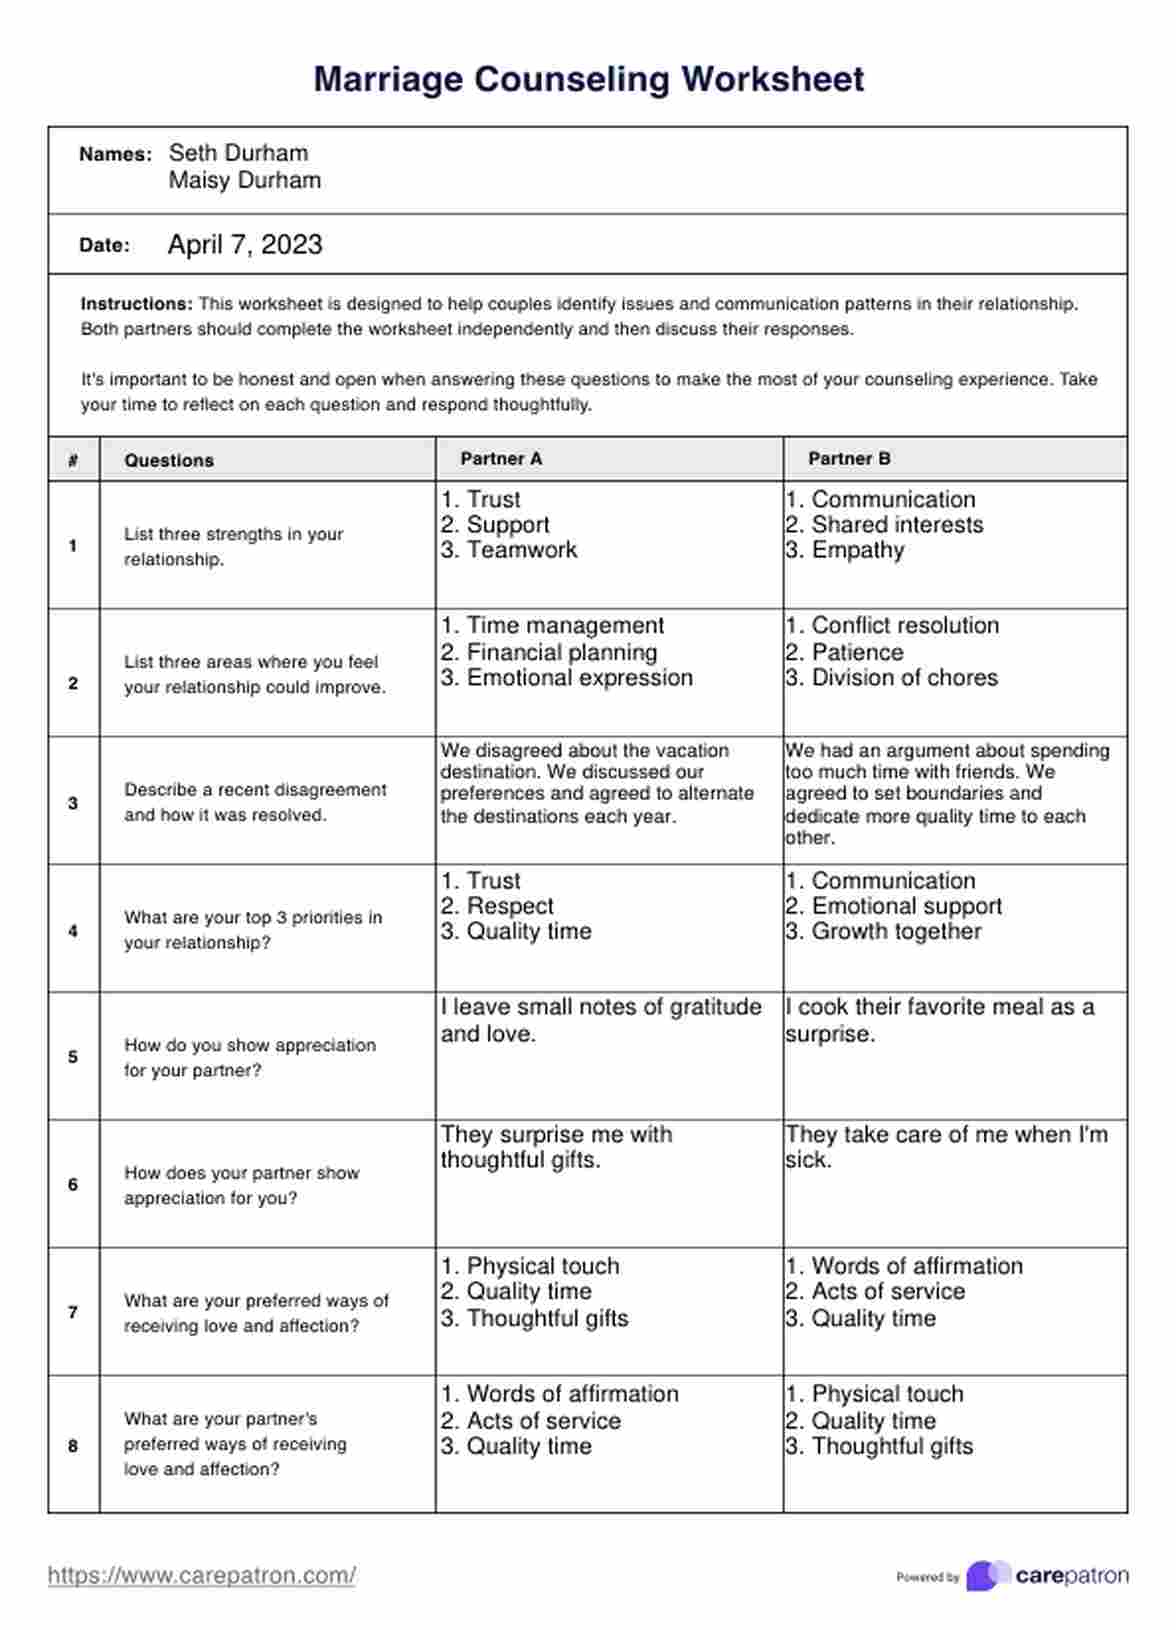 Marriage Counseling Worksheets PDF Example